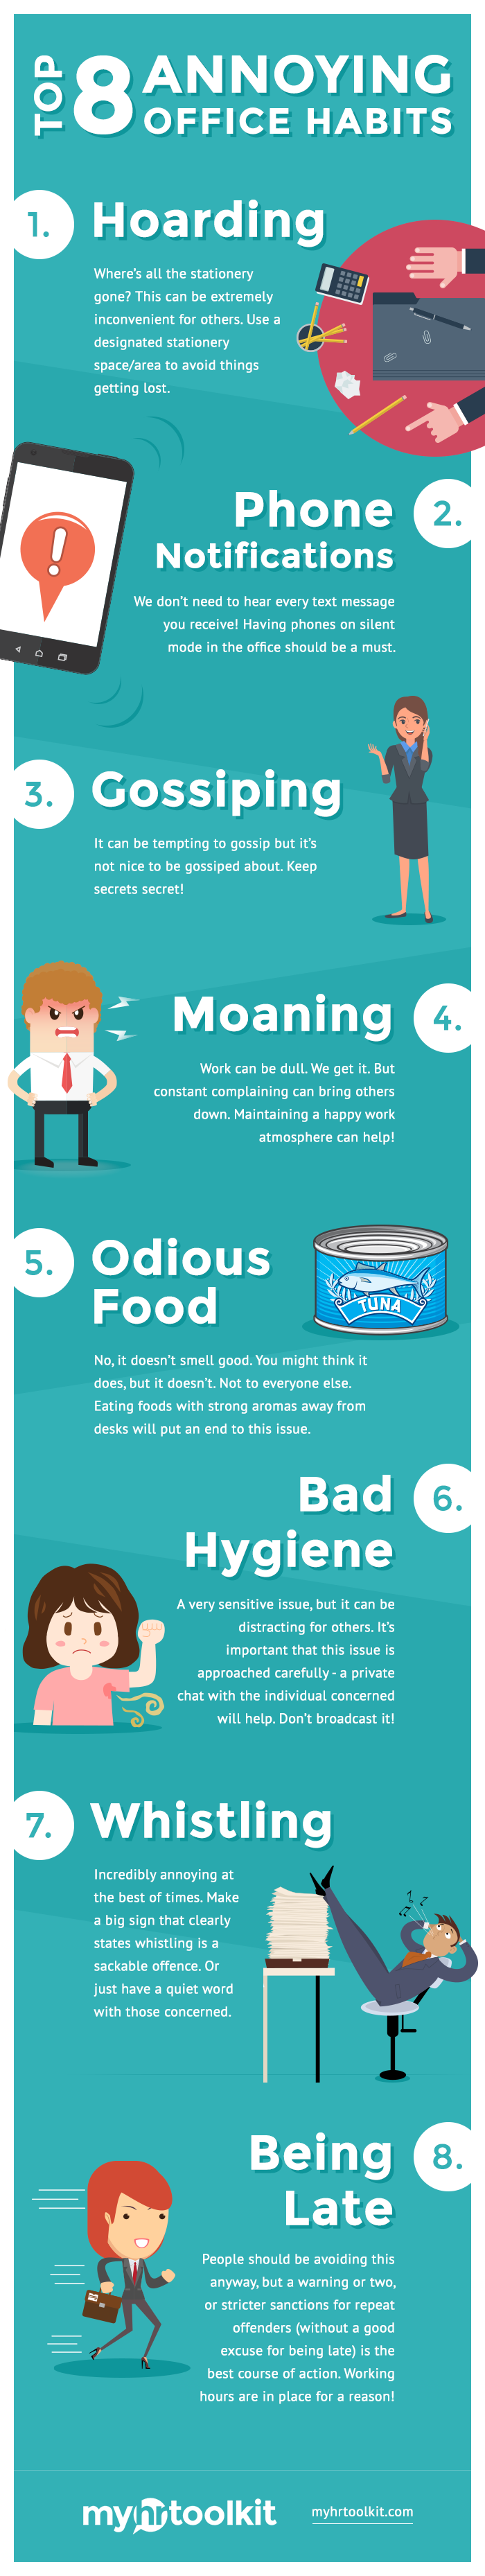 annoying office habits infographic